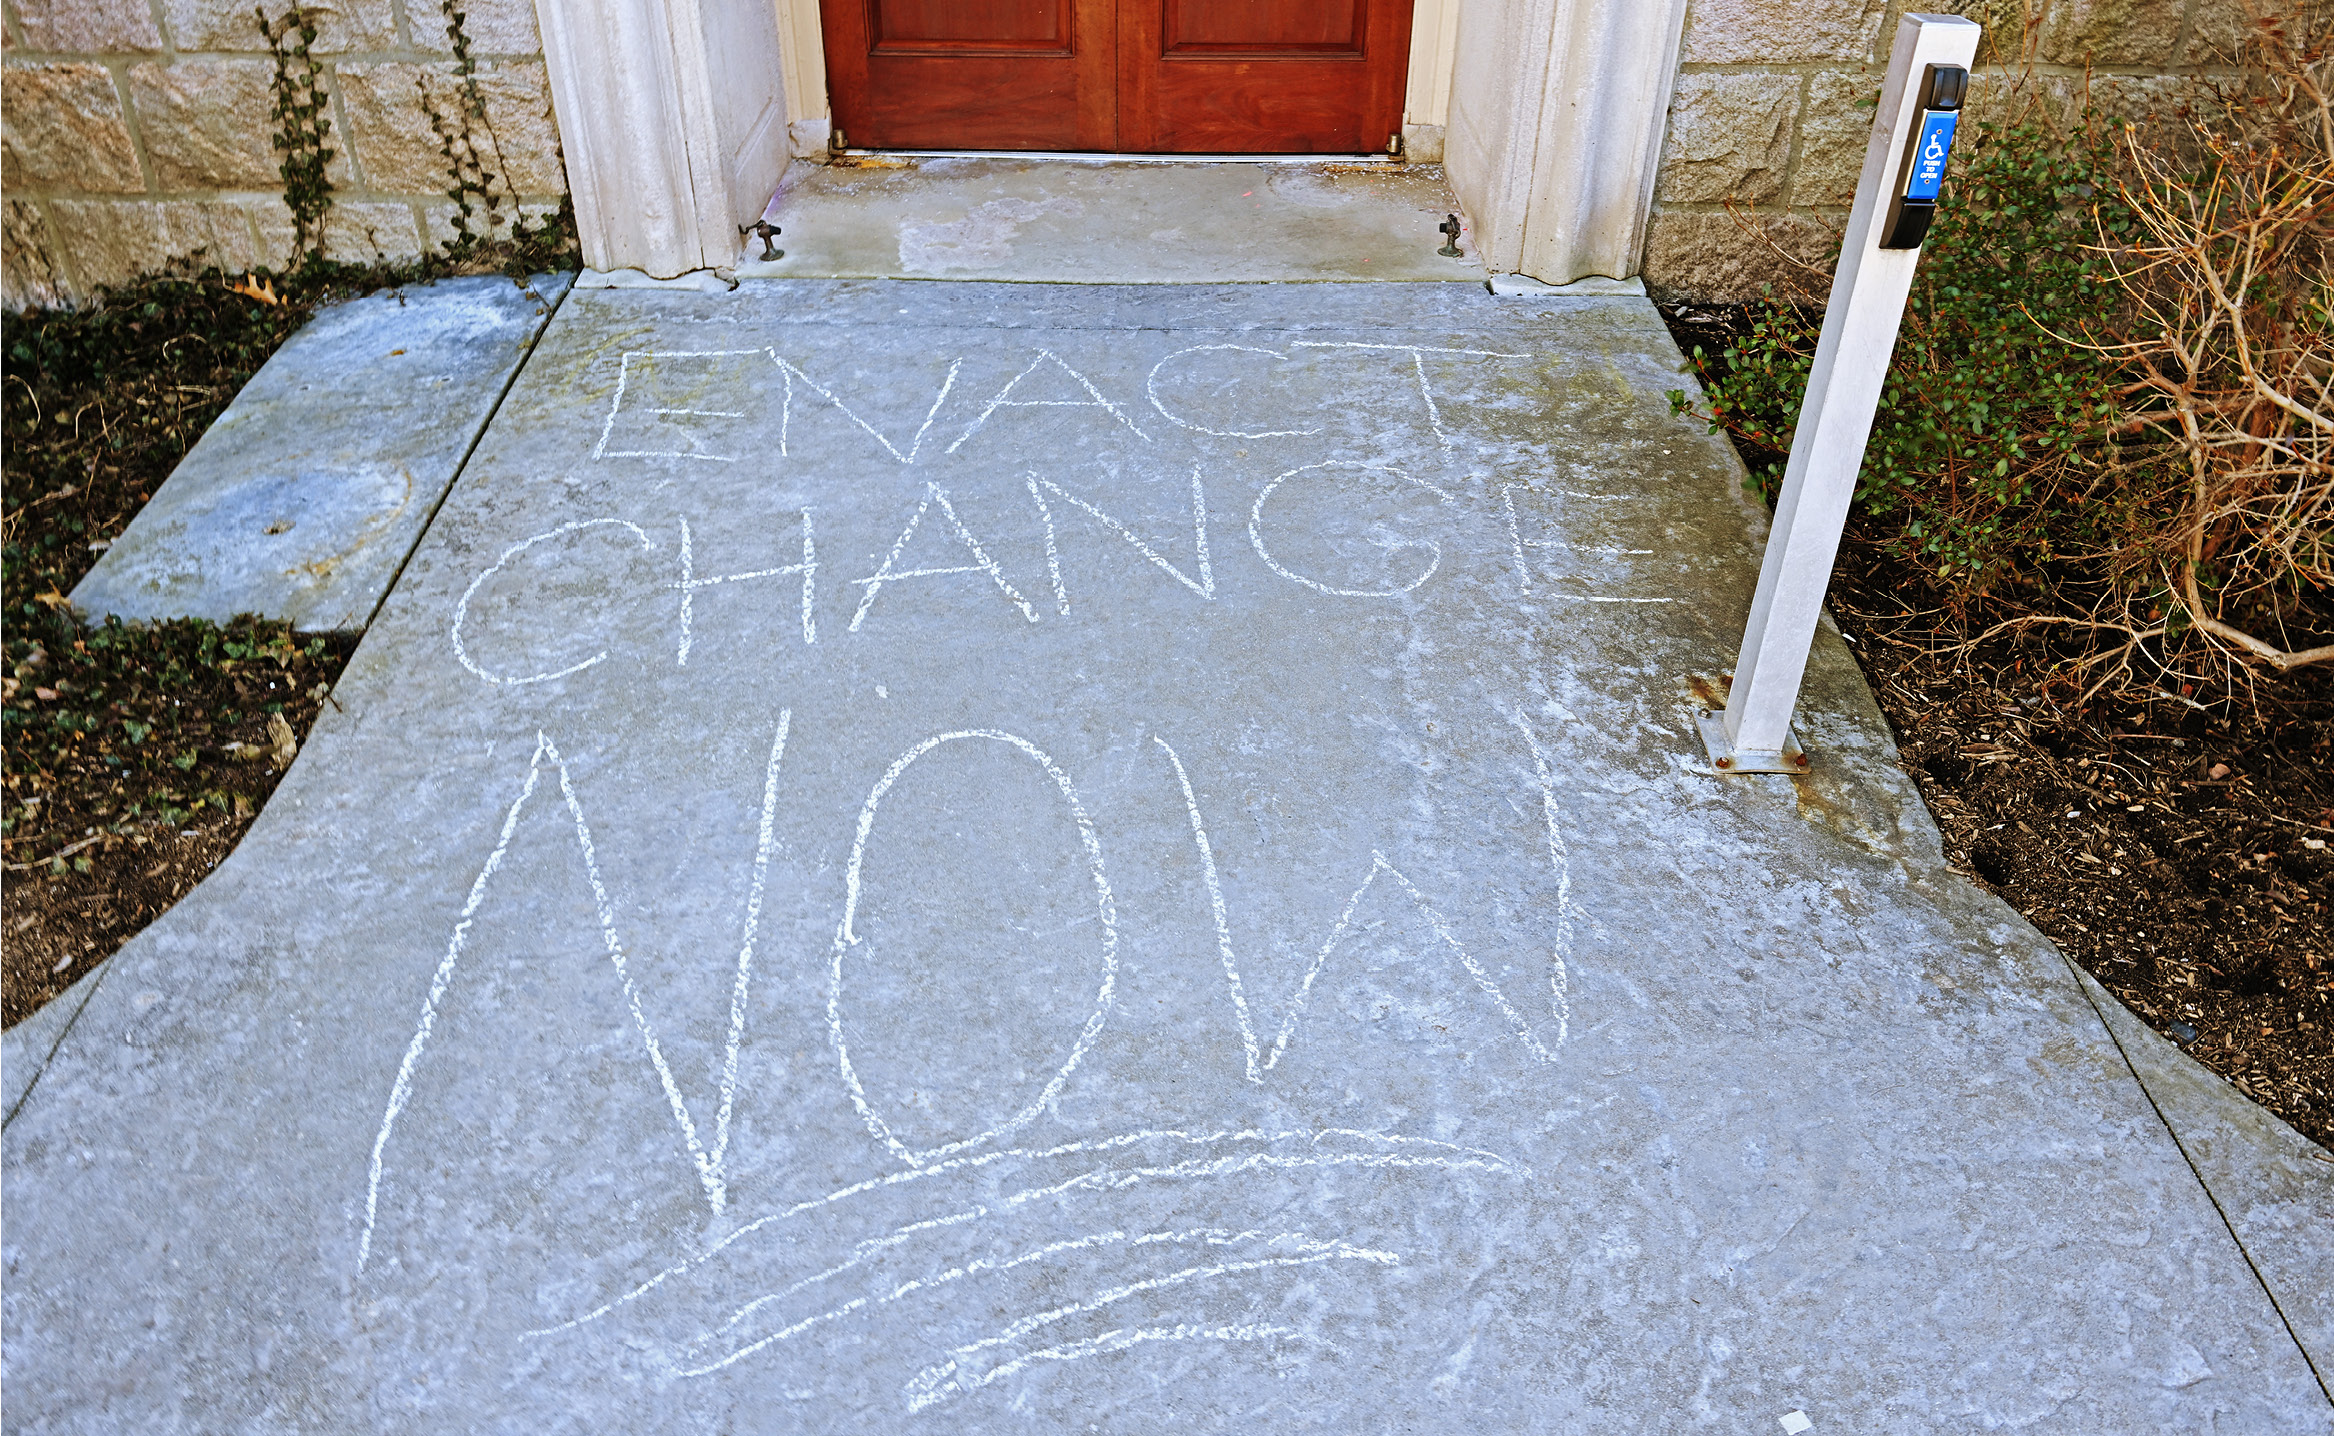 Chalk protests on the sidewalk outside of Fanning Hall reflect recent concerns on campus raised by students, faculty and staff.